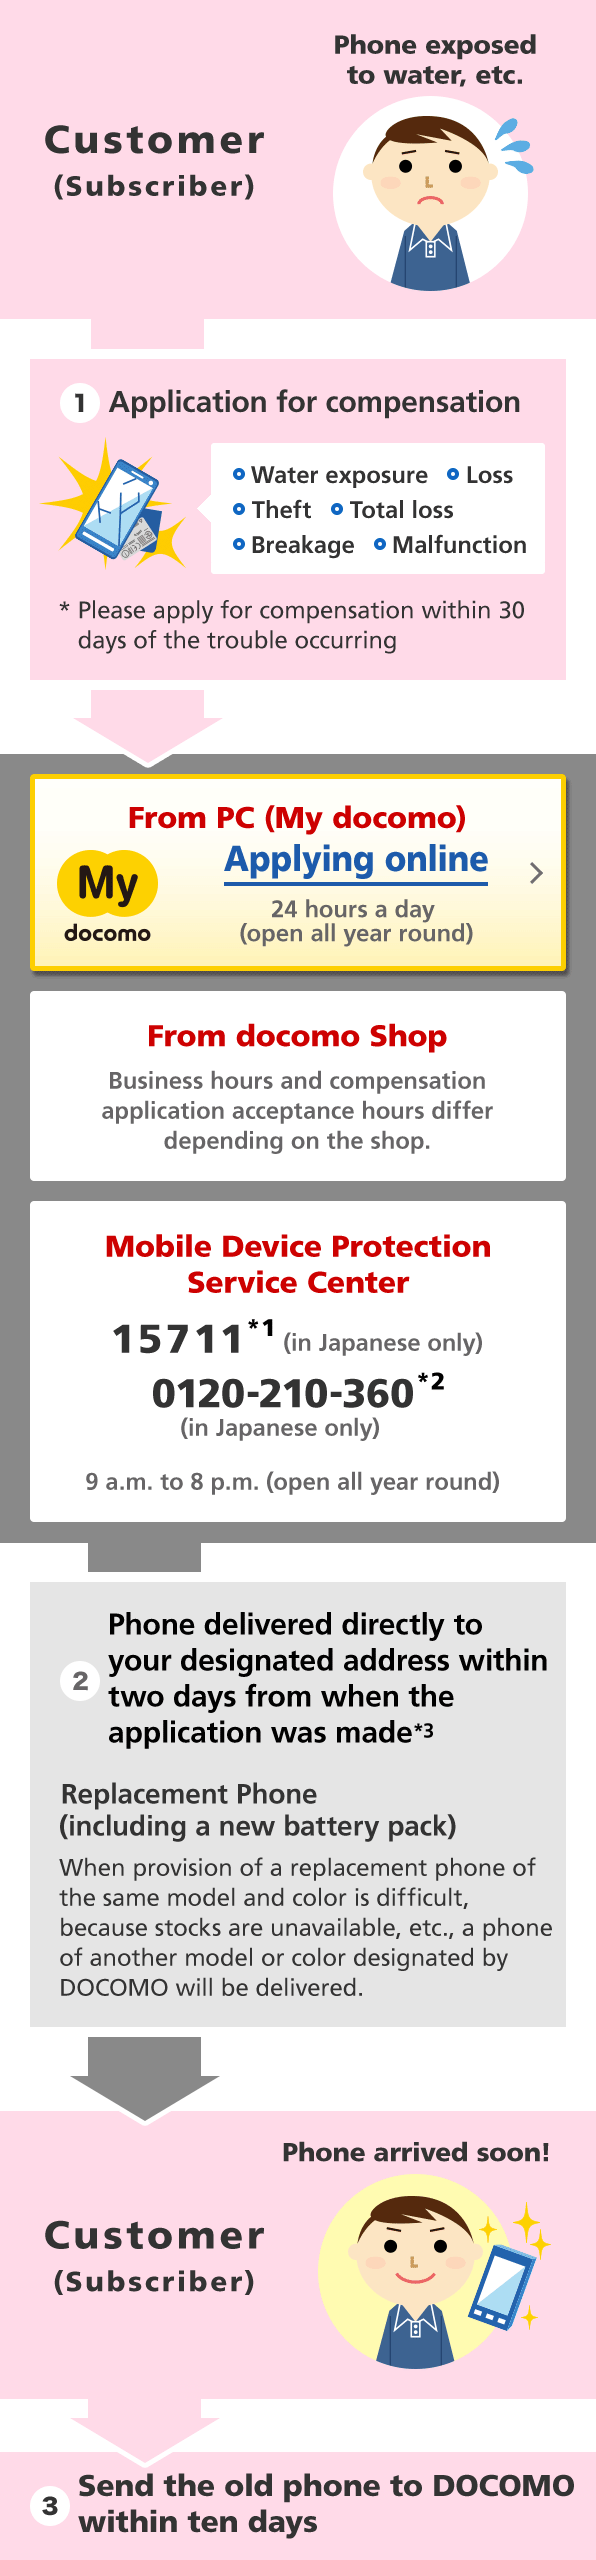 Image of Mobile Device Protection Service